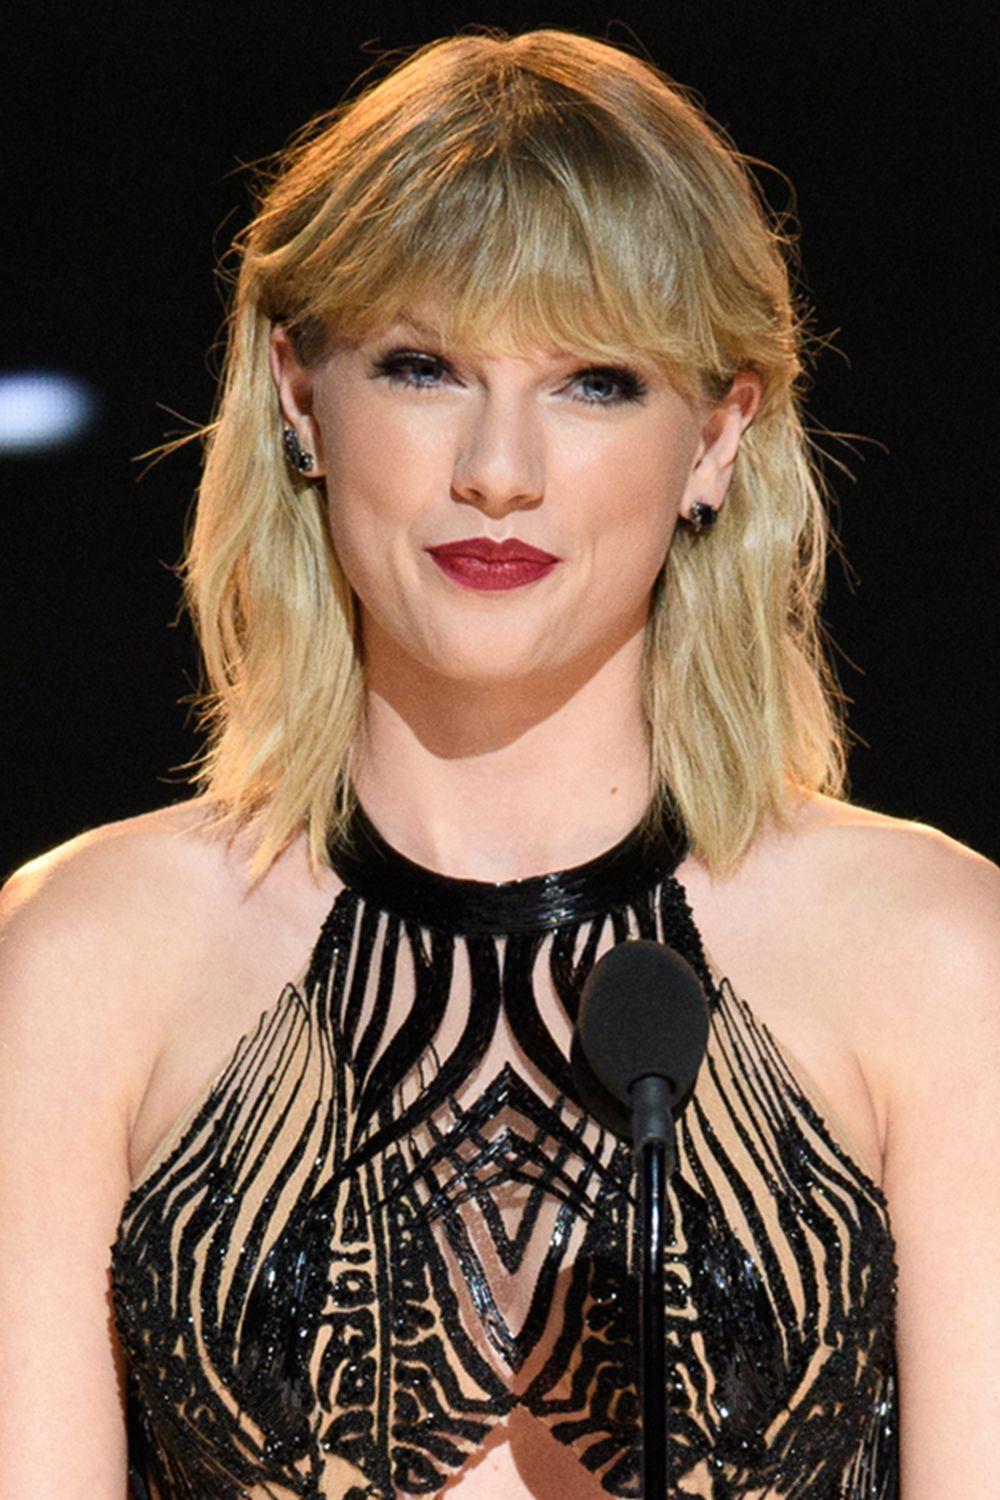 Taylor Swift Hairstyles Swift's Curly, Straight, Short